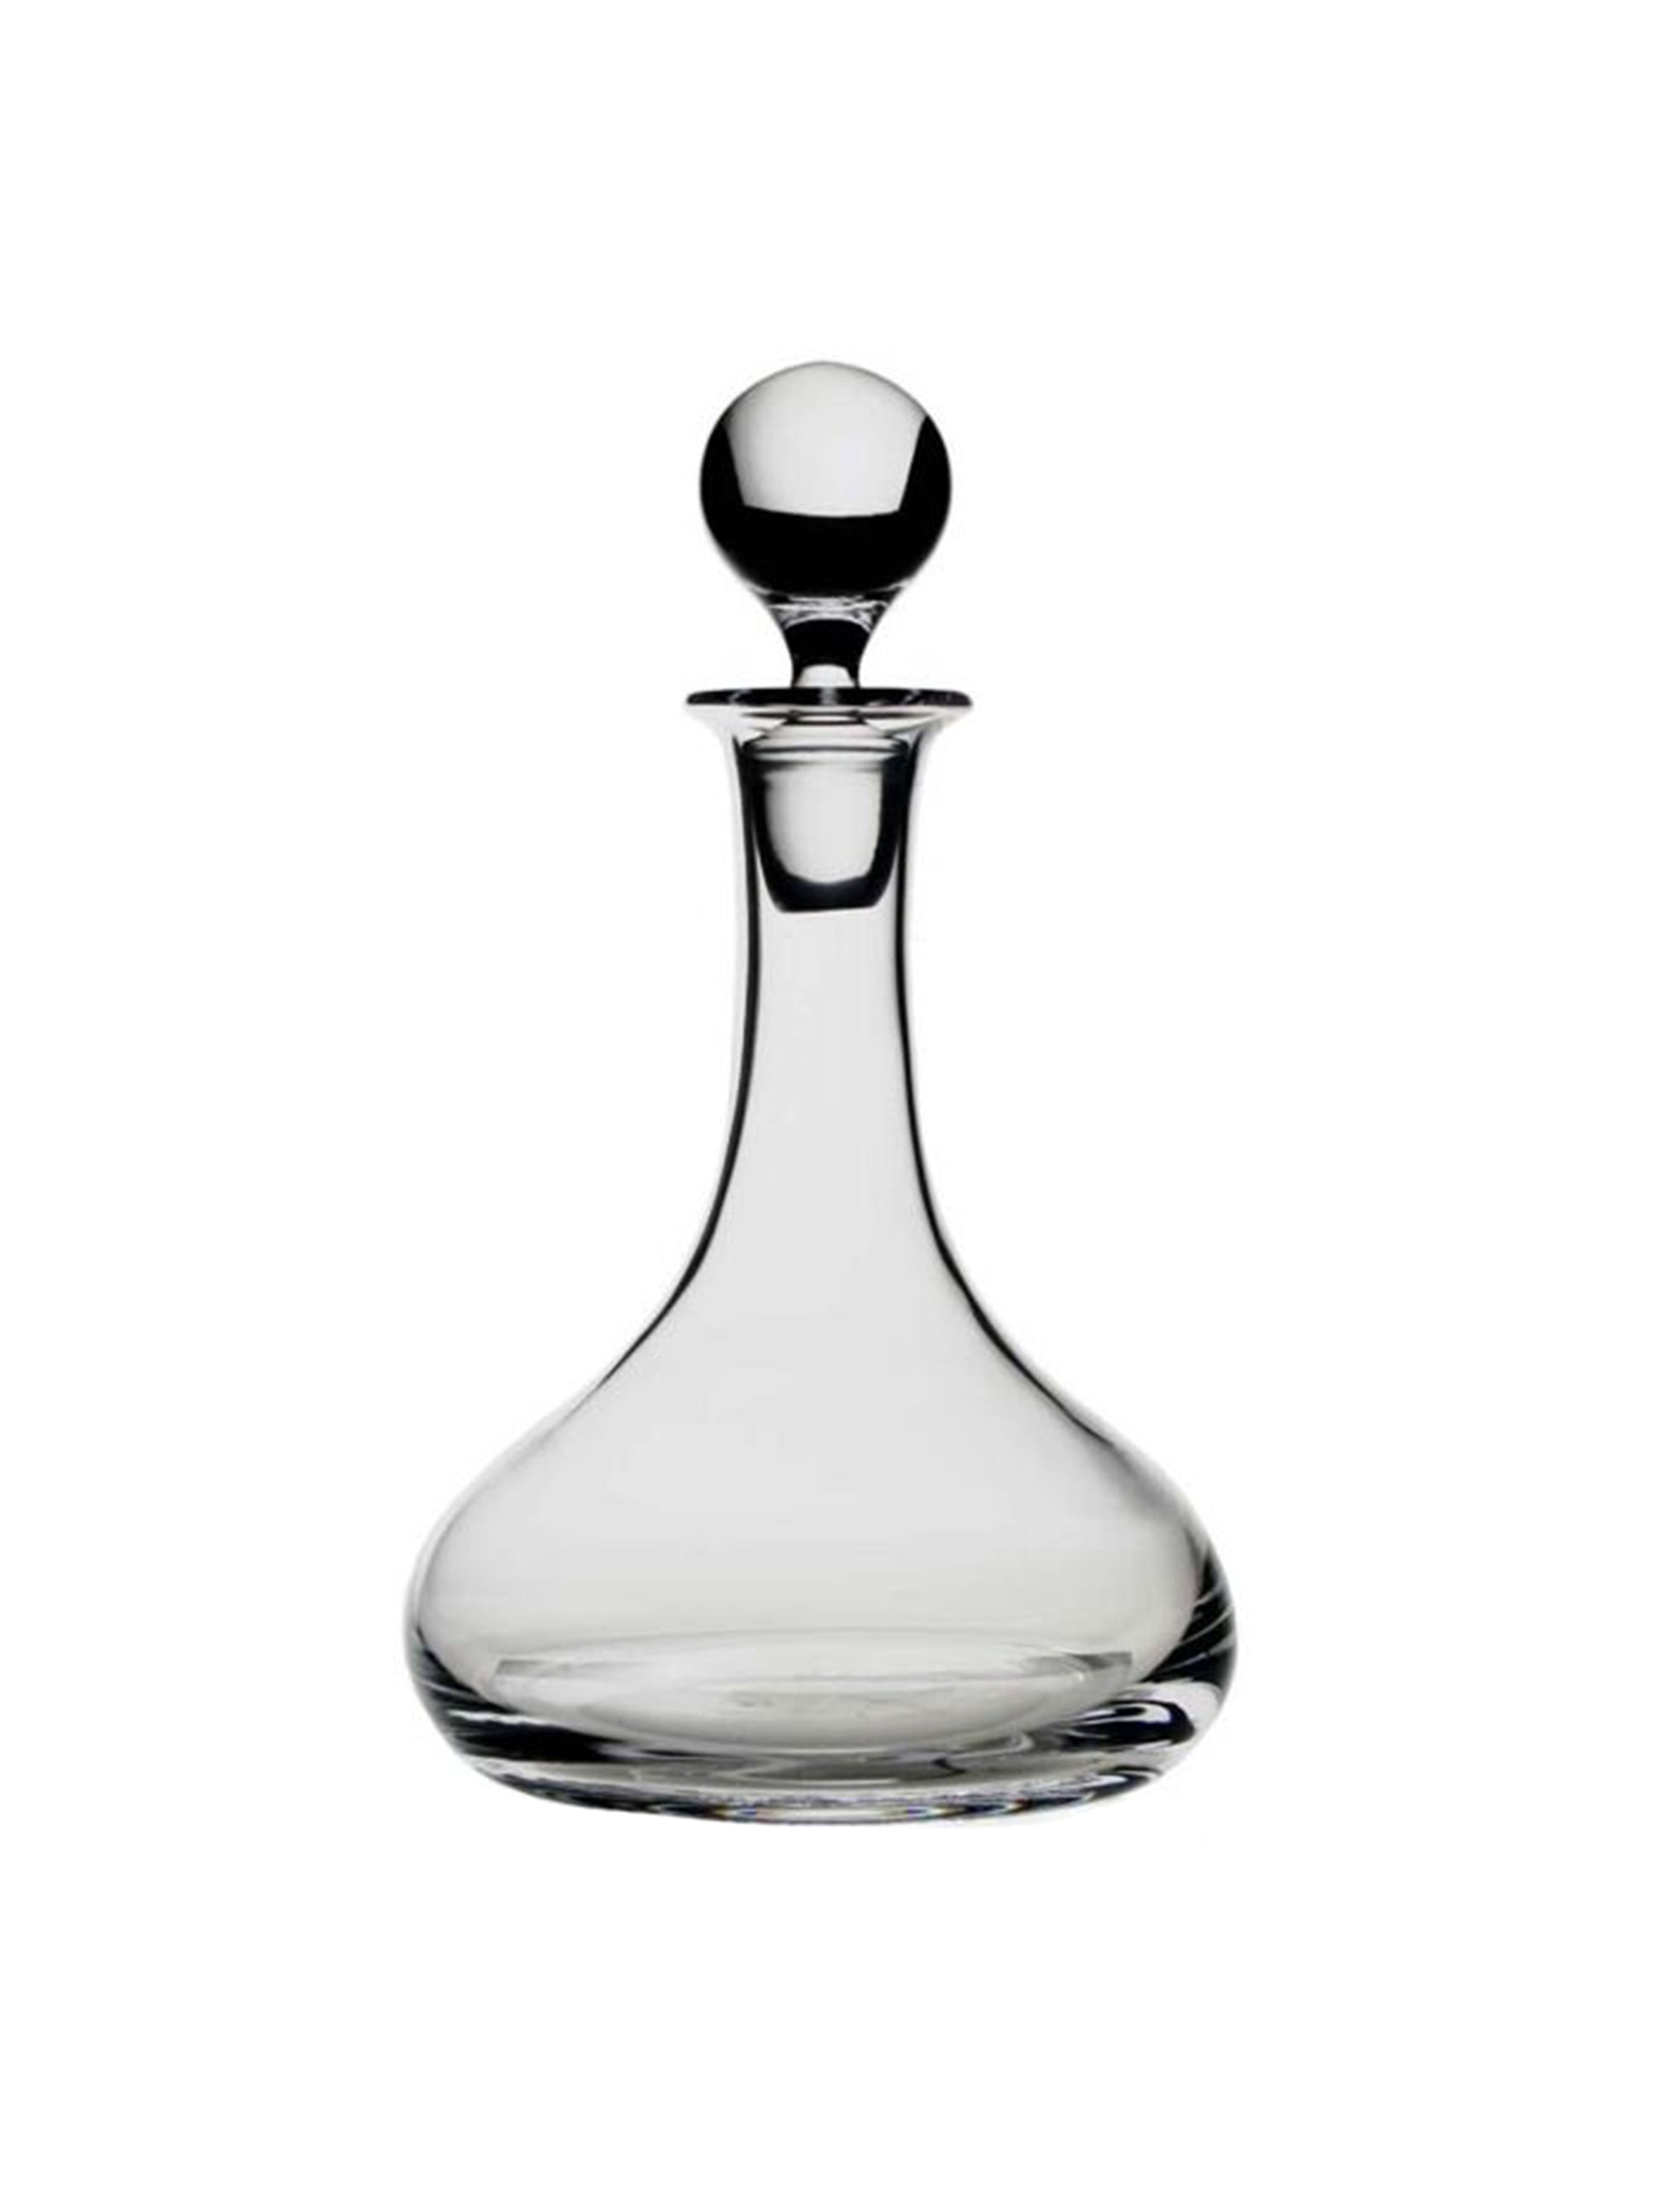 Art Deco Molded Glass Sherry Decanter with Lid